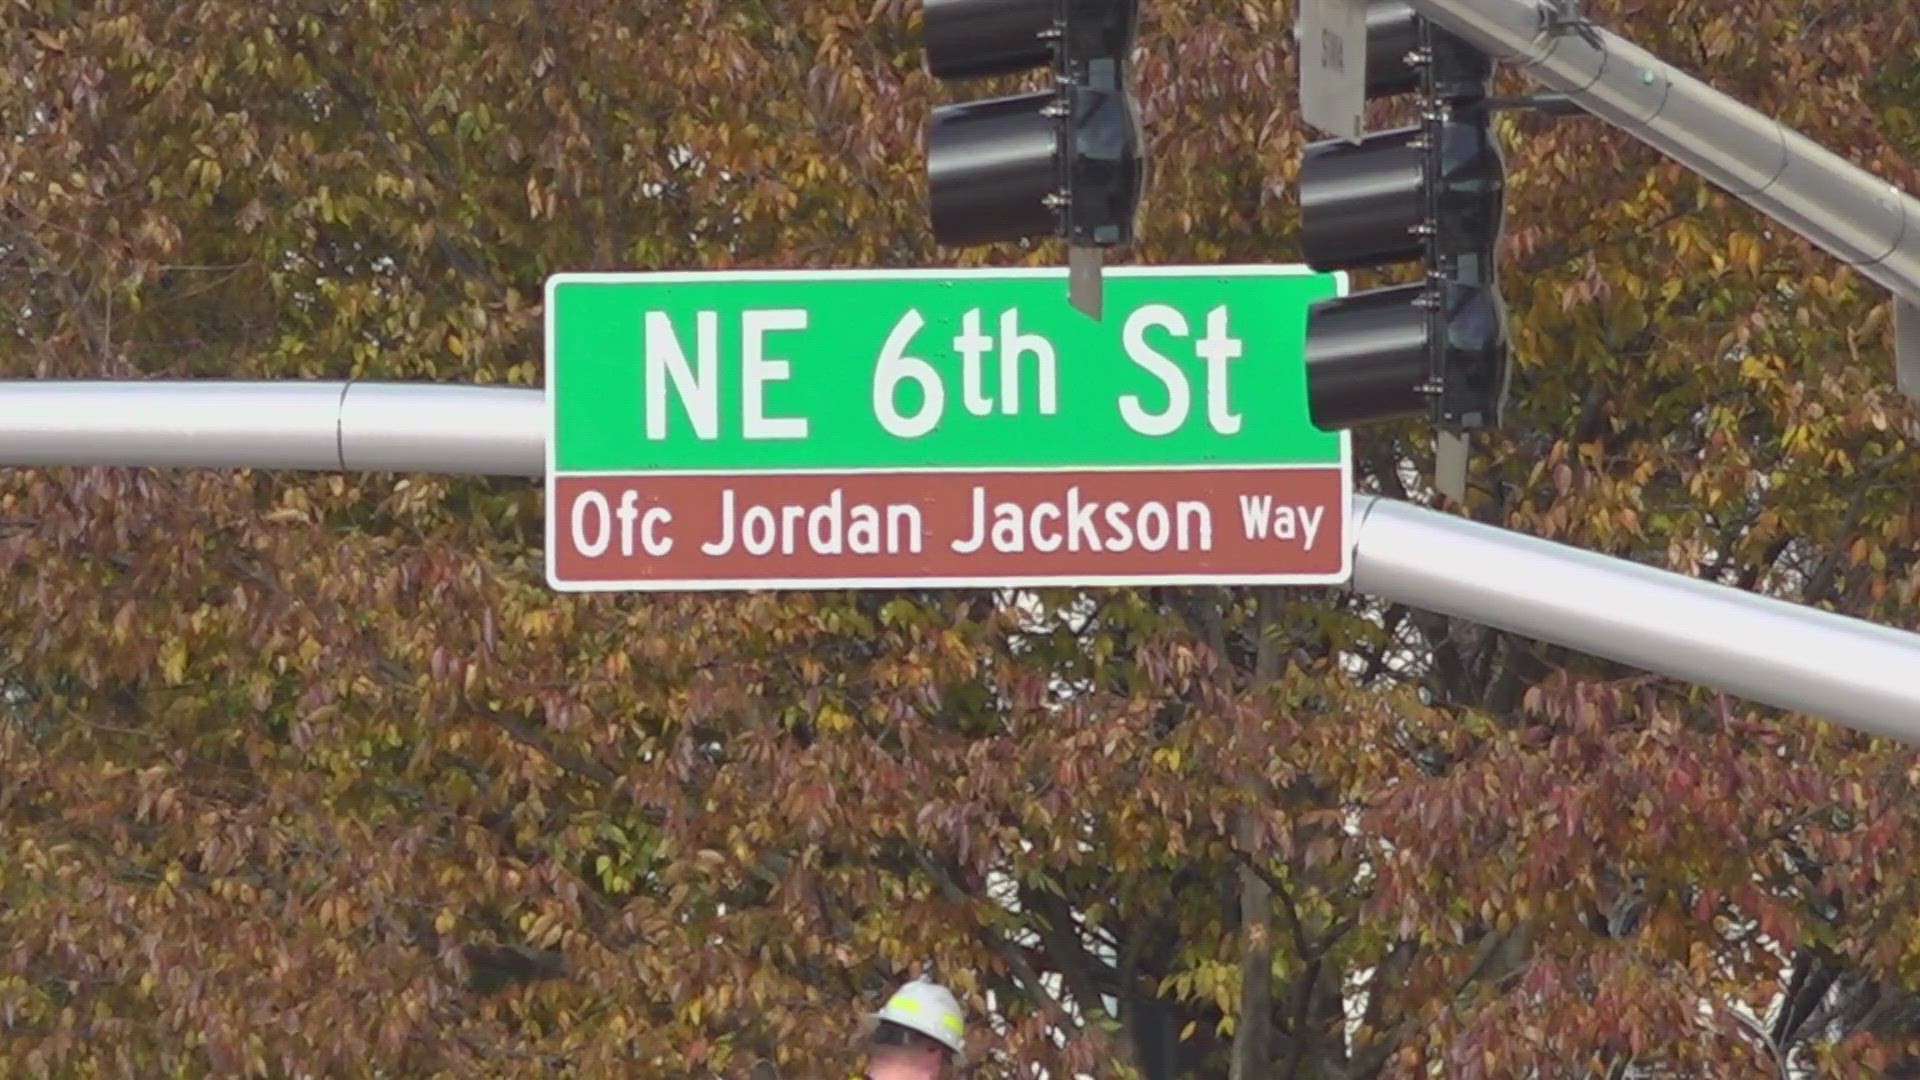 State leaders honored Officer Jordan Jackson with a Law Enforcement Medal of Honor and unveiled a street sign paying tribute to his service.